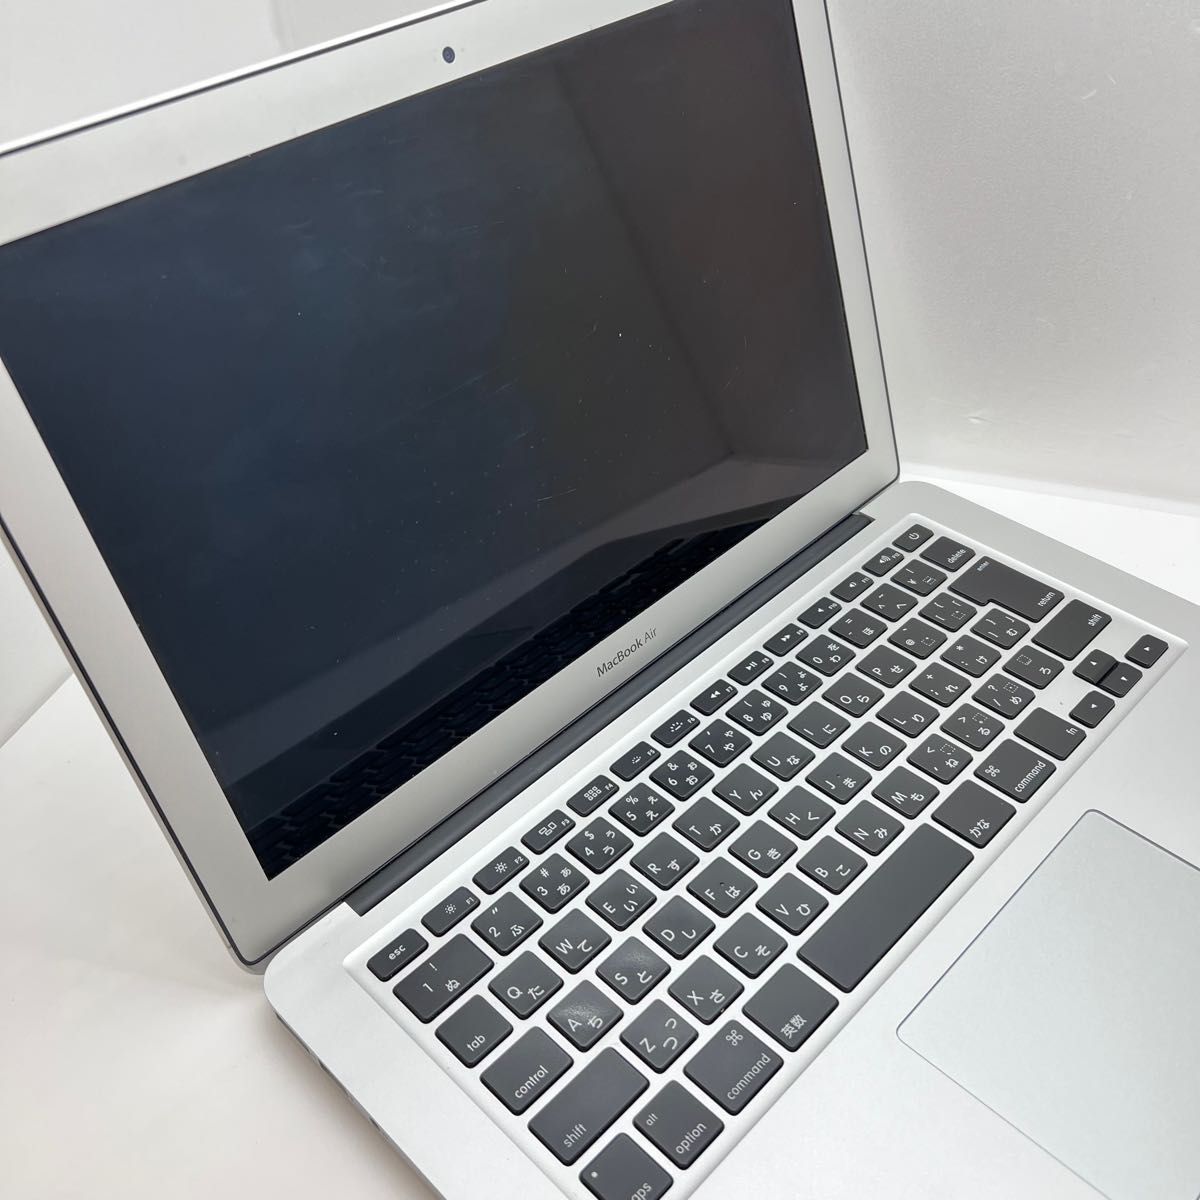 MacBook Air Office付き 充電器付き｜PayPayフリマ